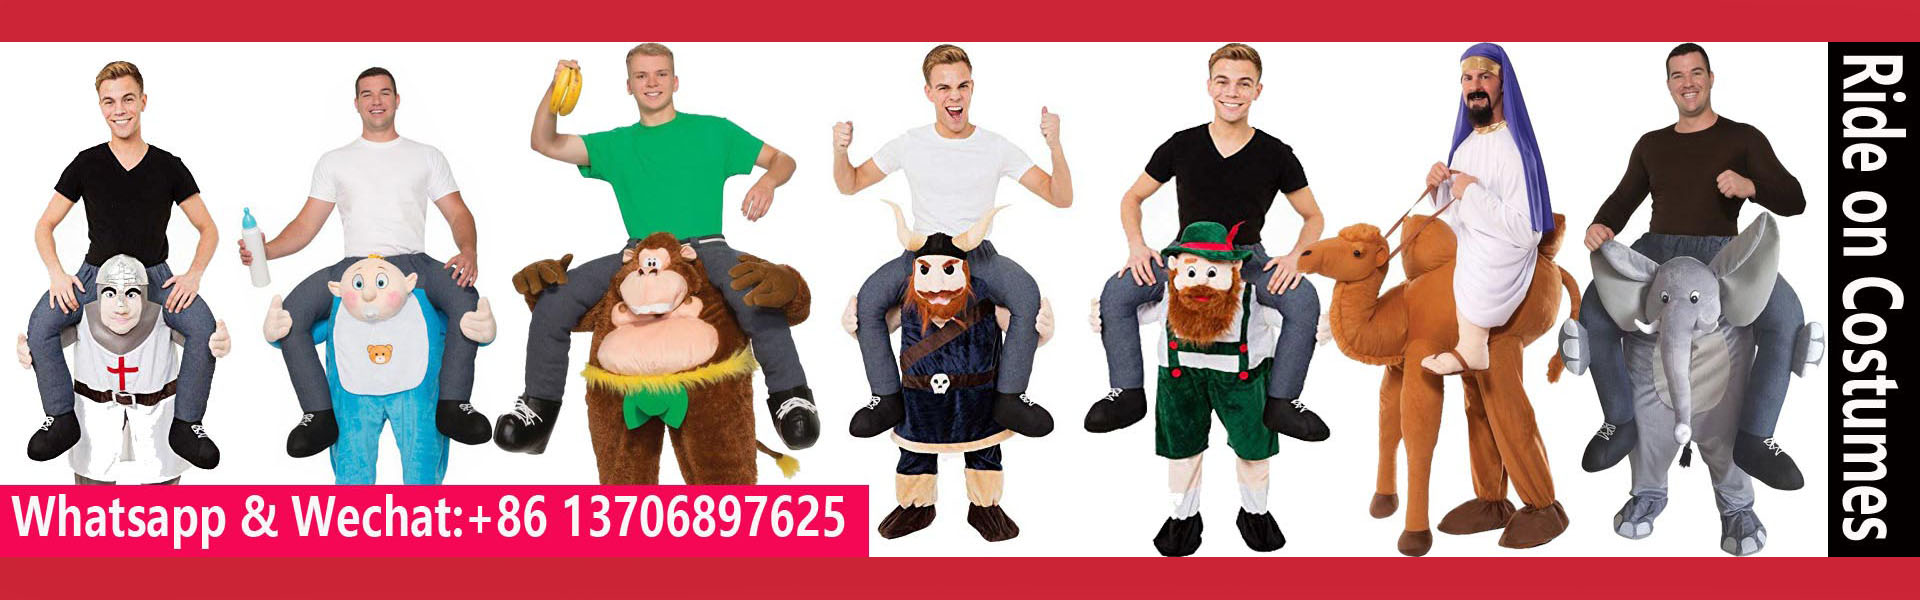 Ride on costumes wholesale